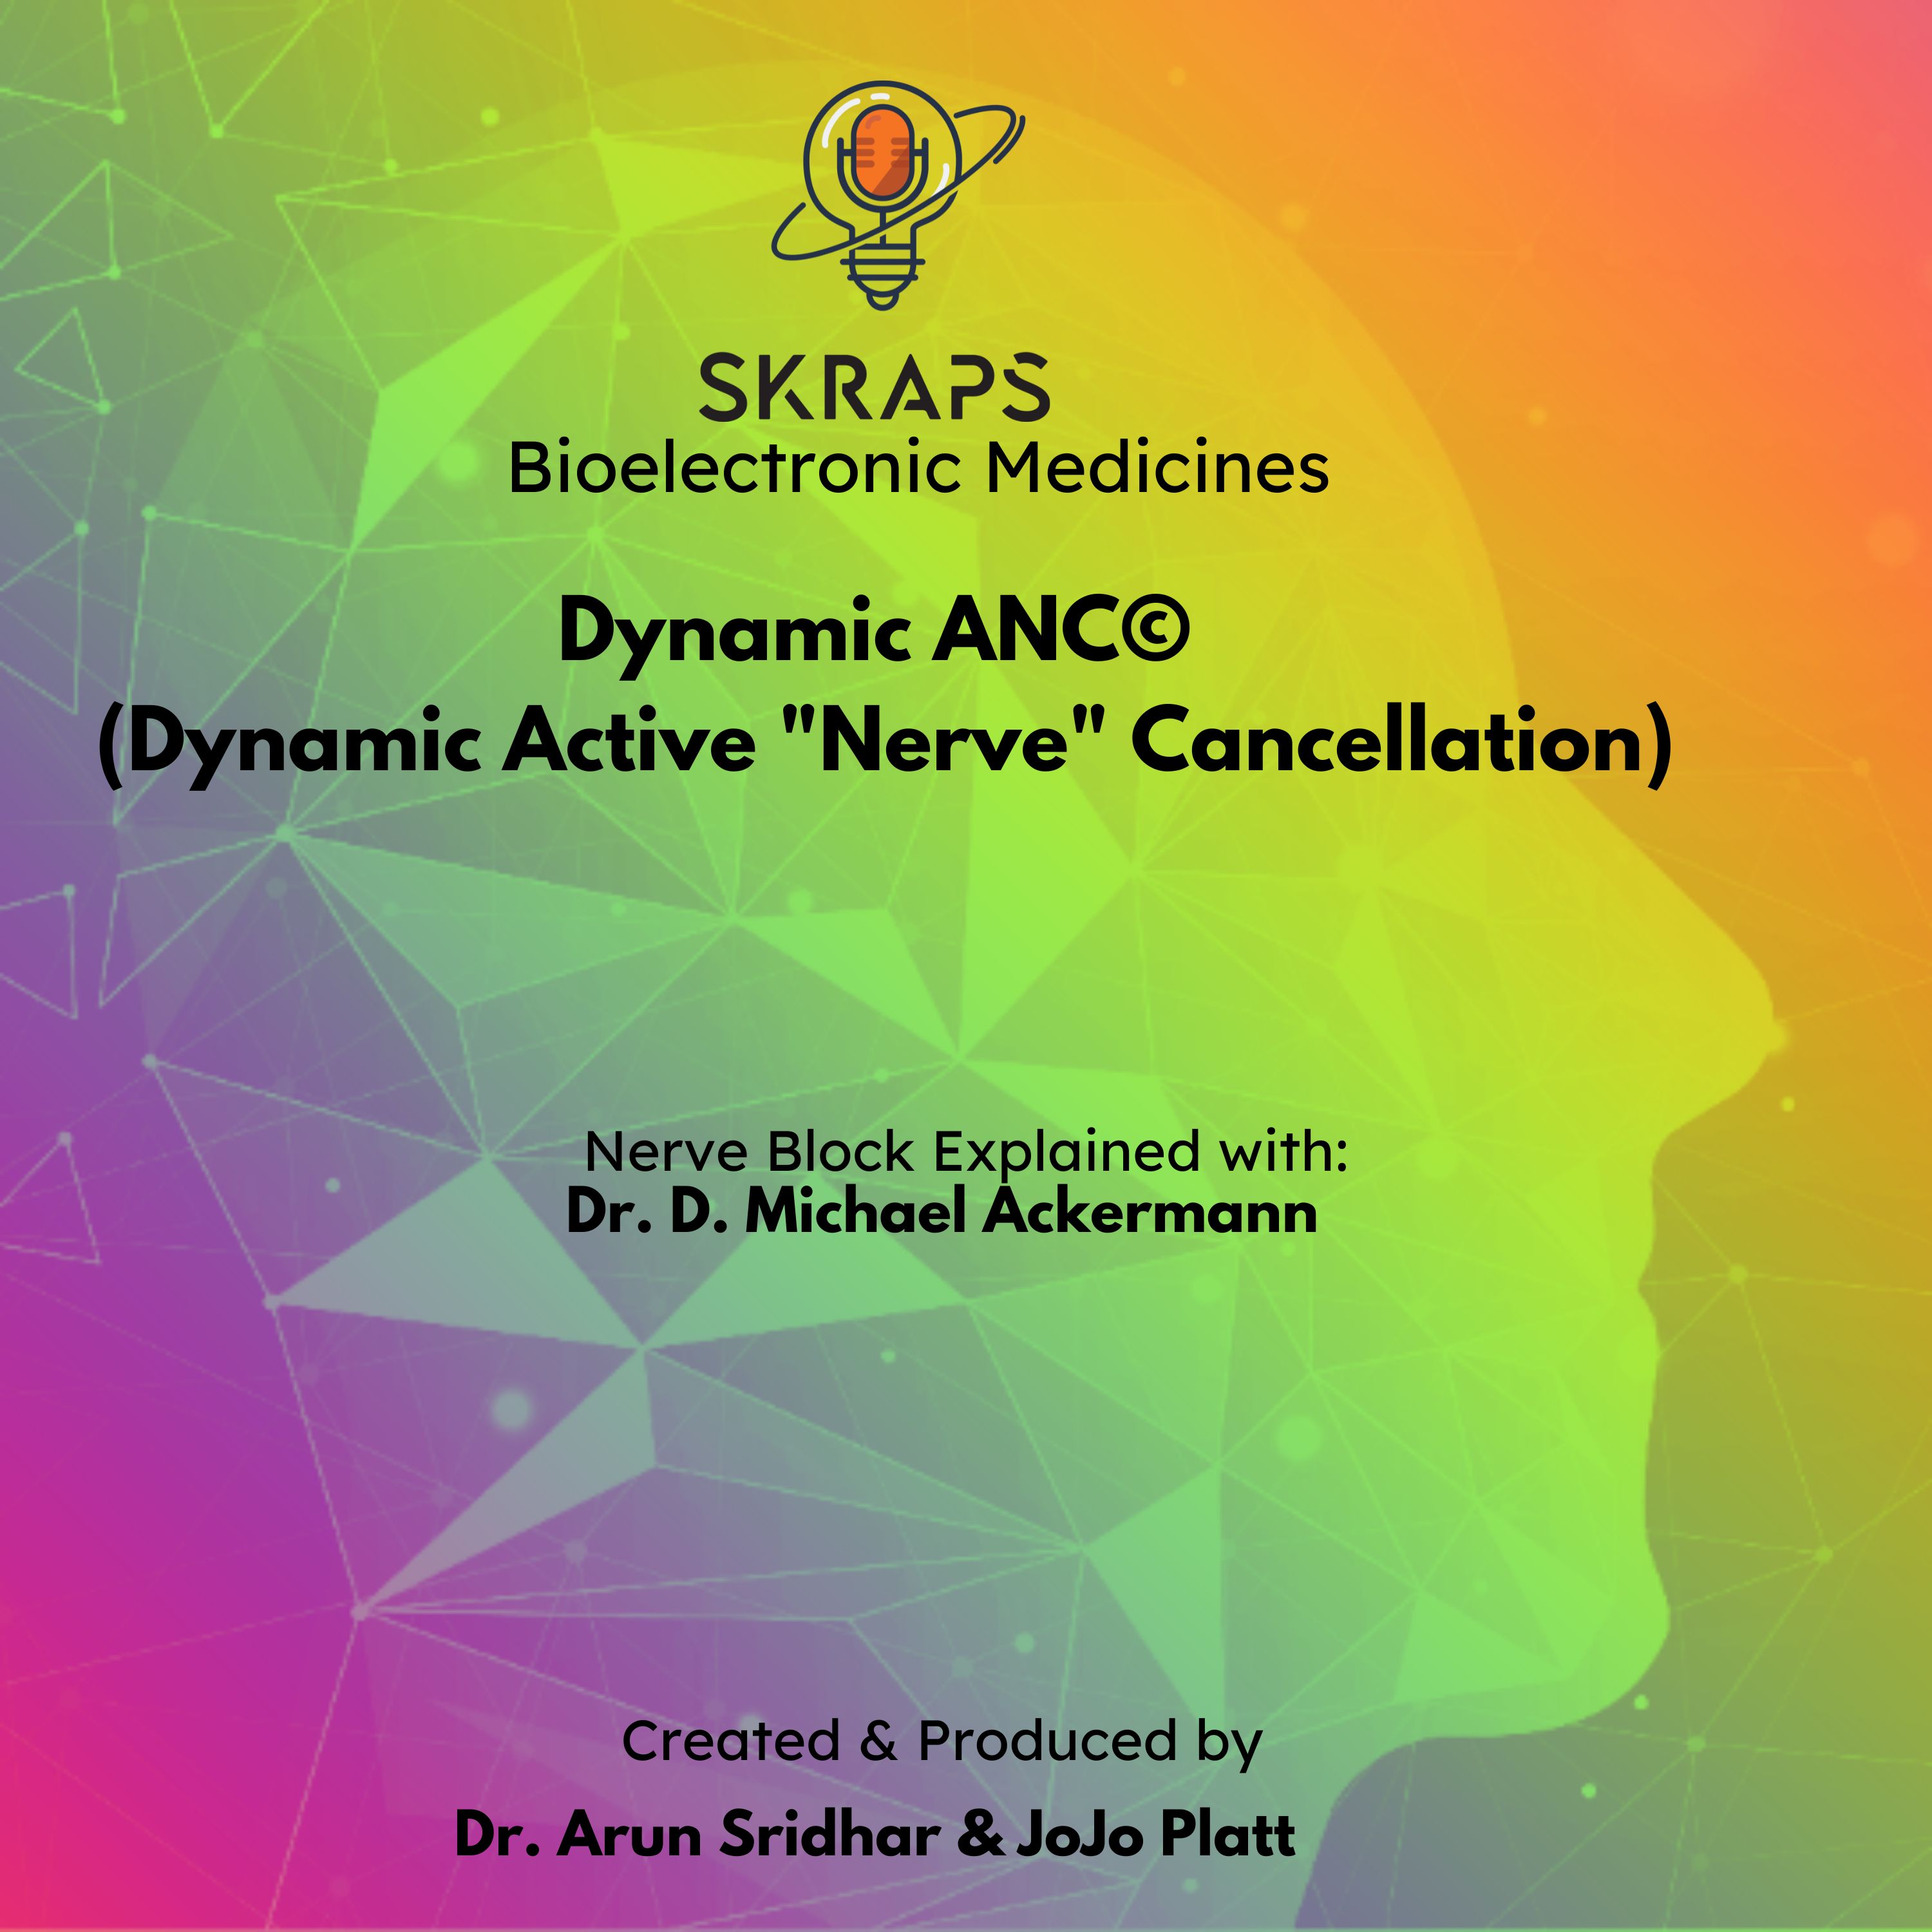 It’s time for DANC - “Dynamic ANC (Active ”Nerve” Cancellation)”